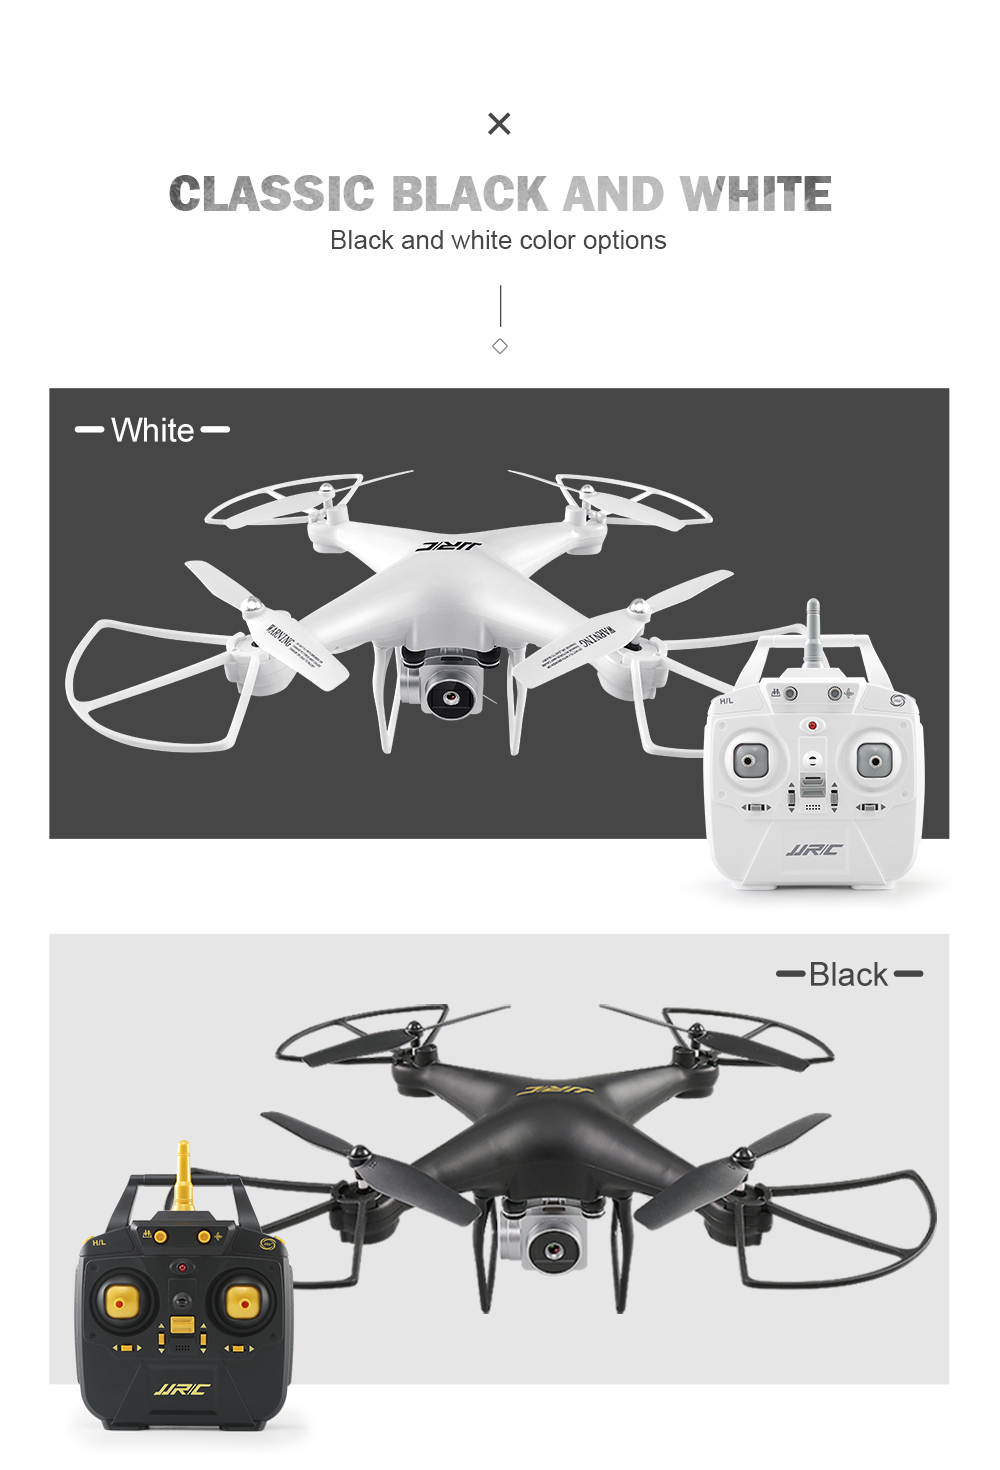 JJRC-H68-Bellwether-WiFi-FPV-with-6K-720P-HD-Camera-20mins-Flight-Time-Altitude-Hold-Headless-Mode-R-1909760-3